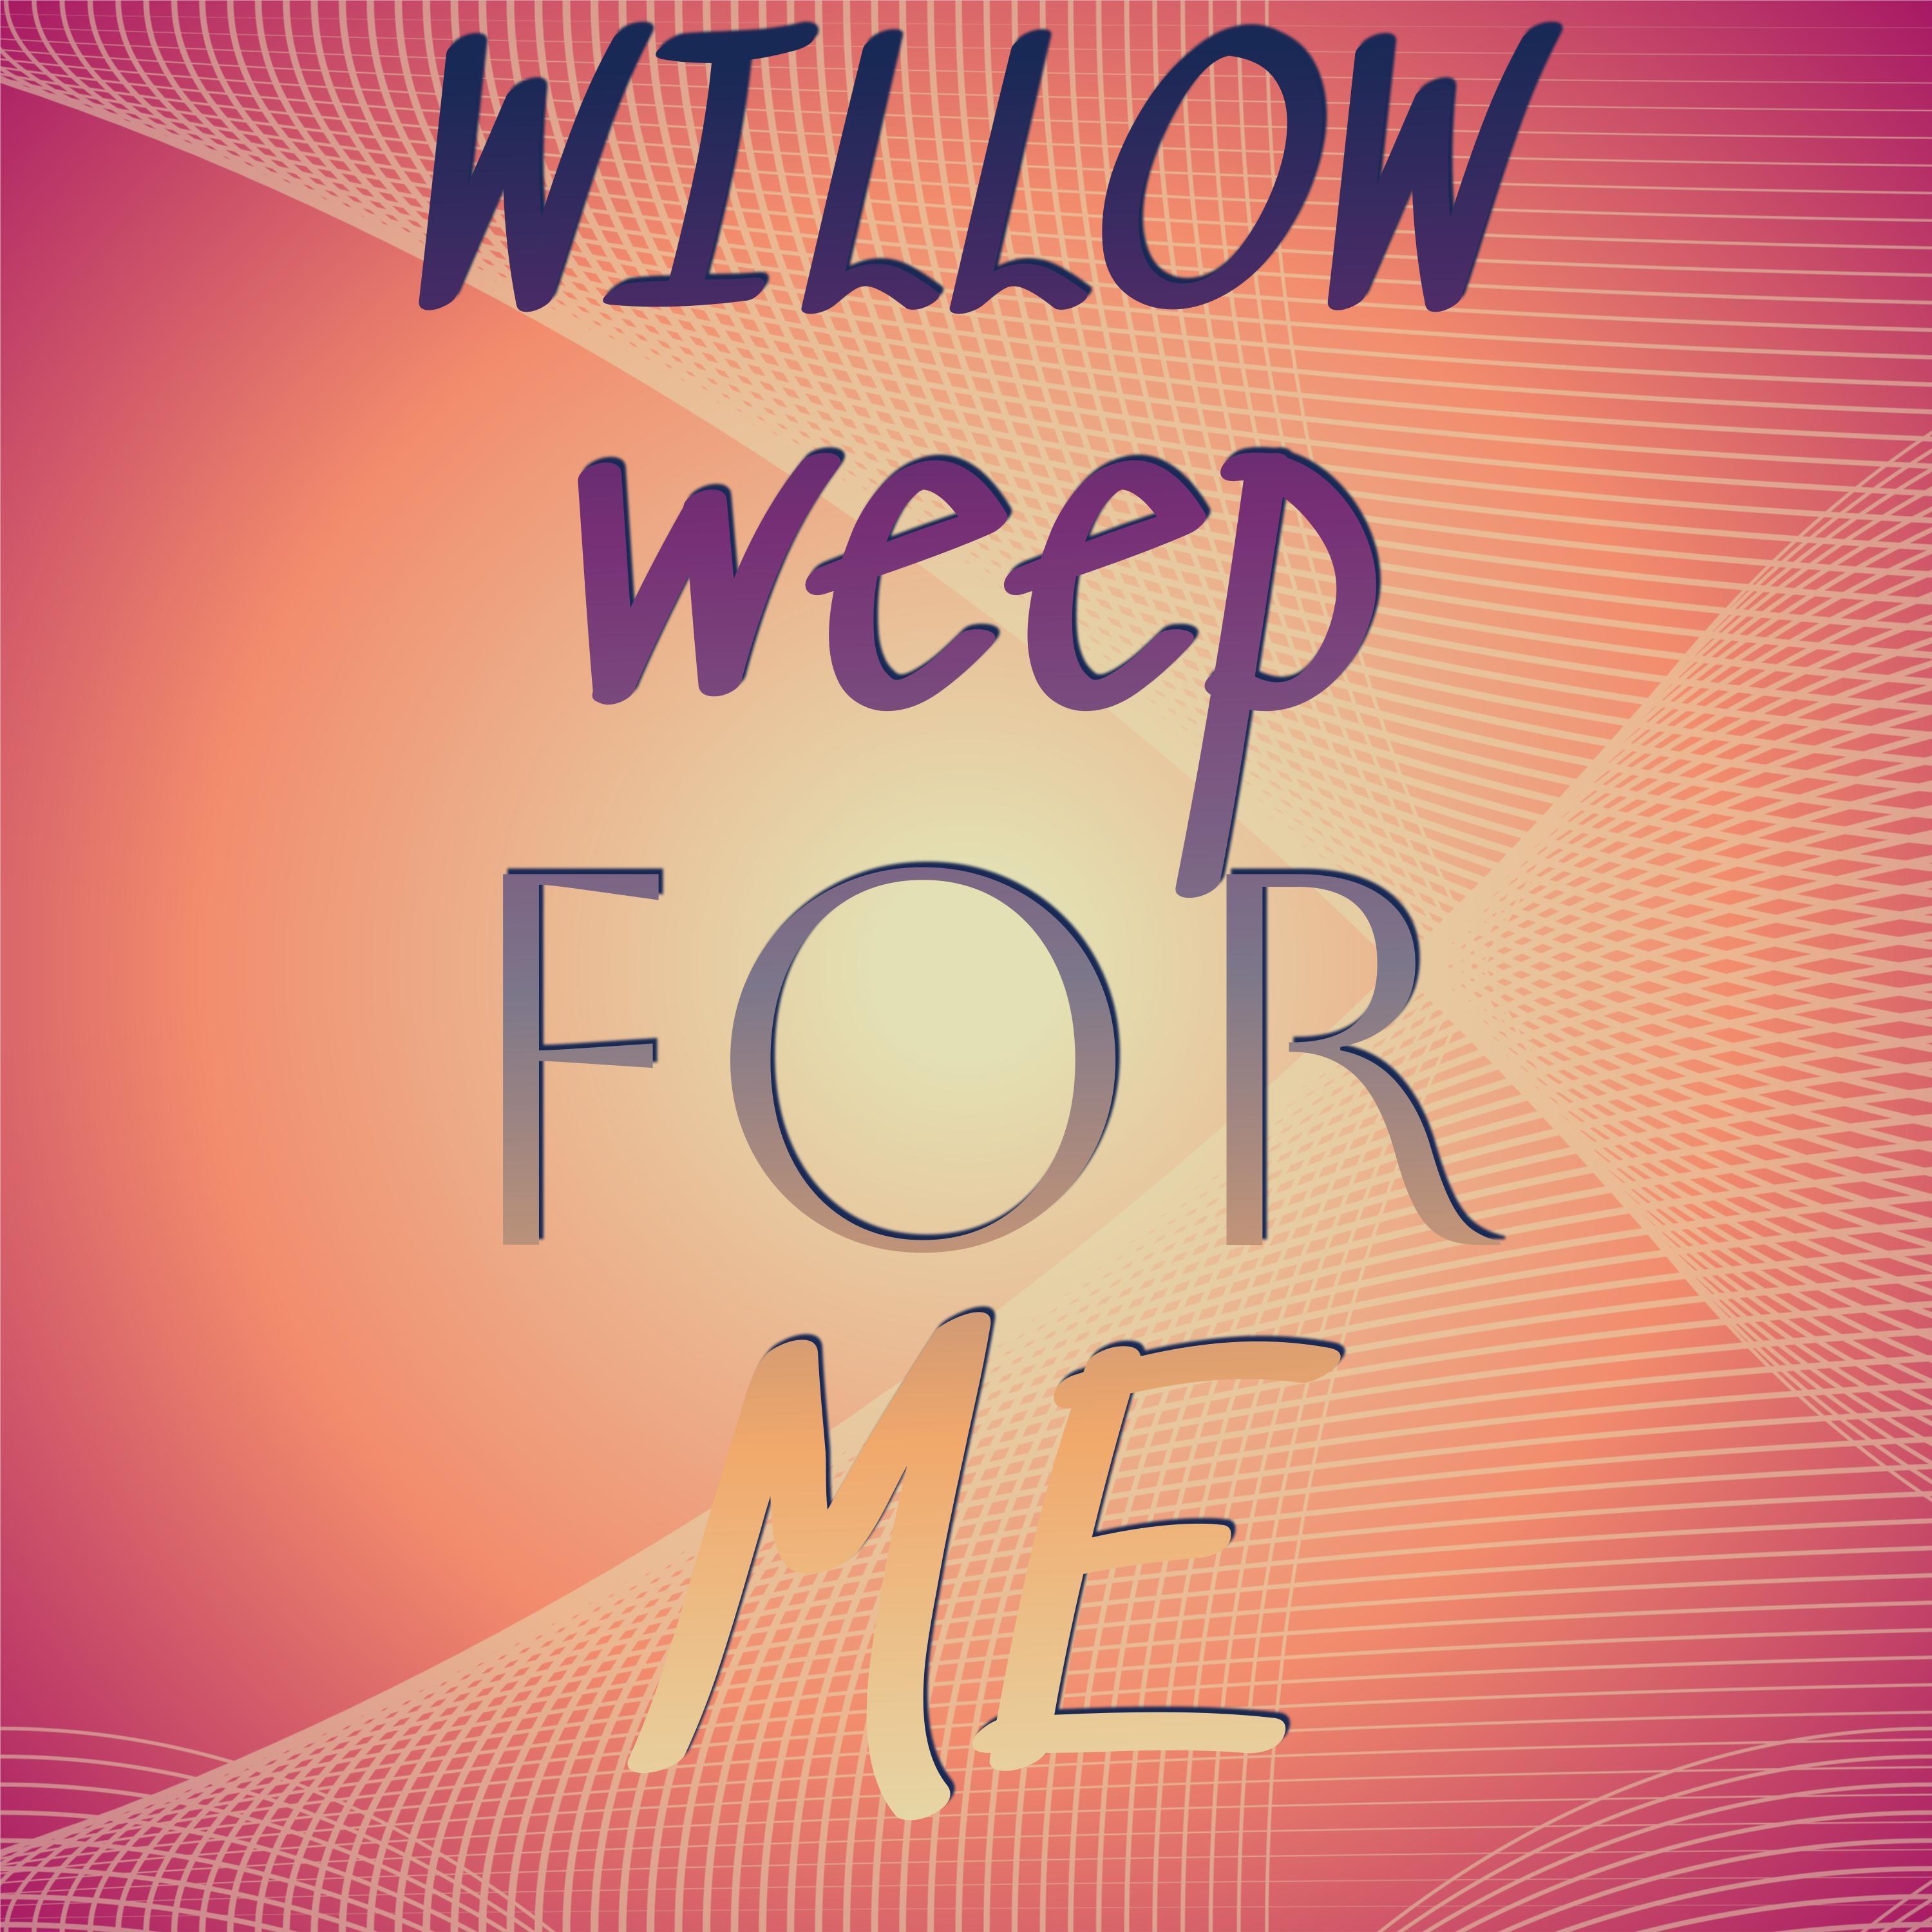 Jan Johansson - Willow weep for me